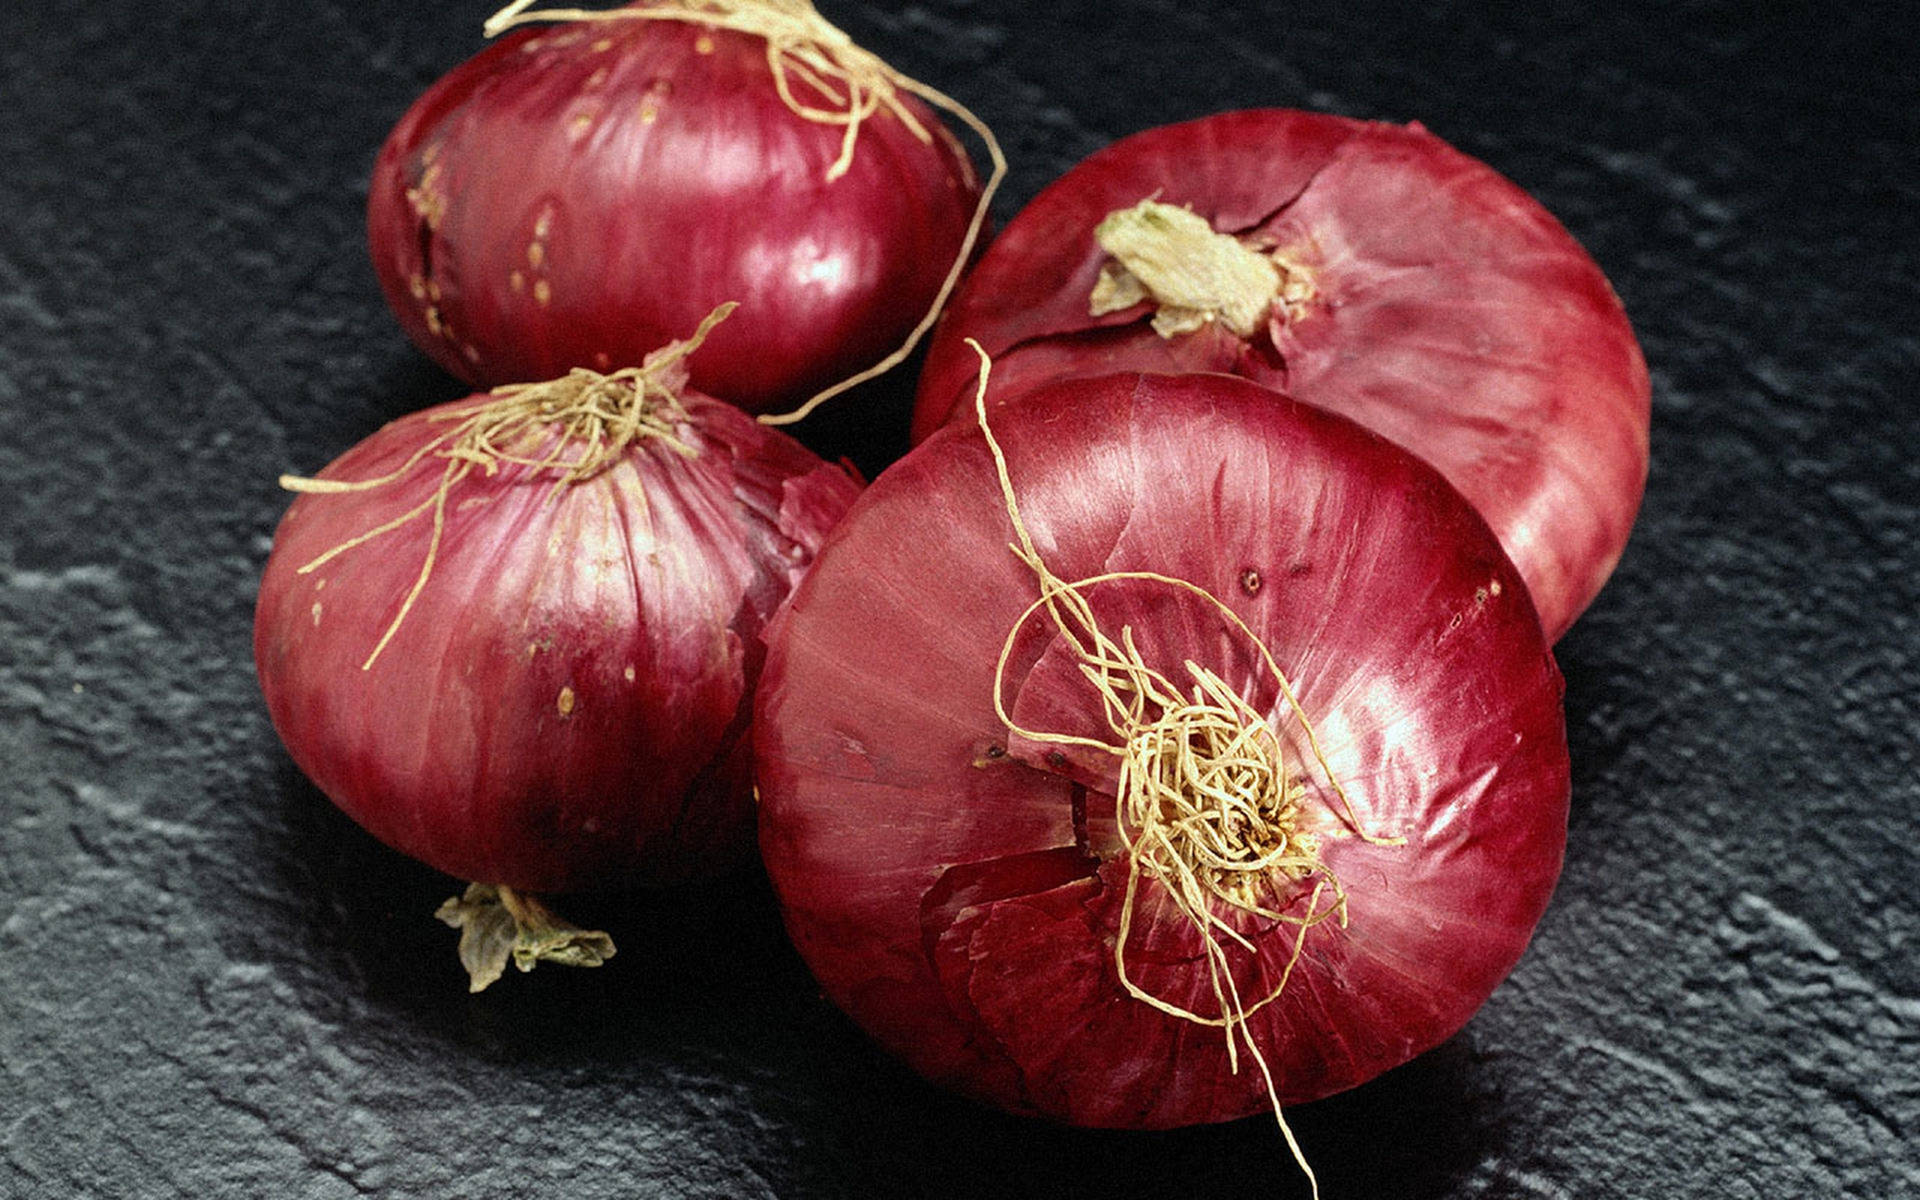 Amazing Tight Shot Of Red Onions Wallpaper